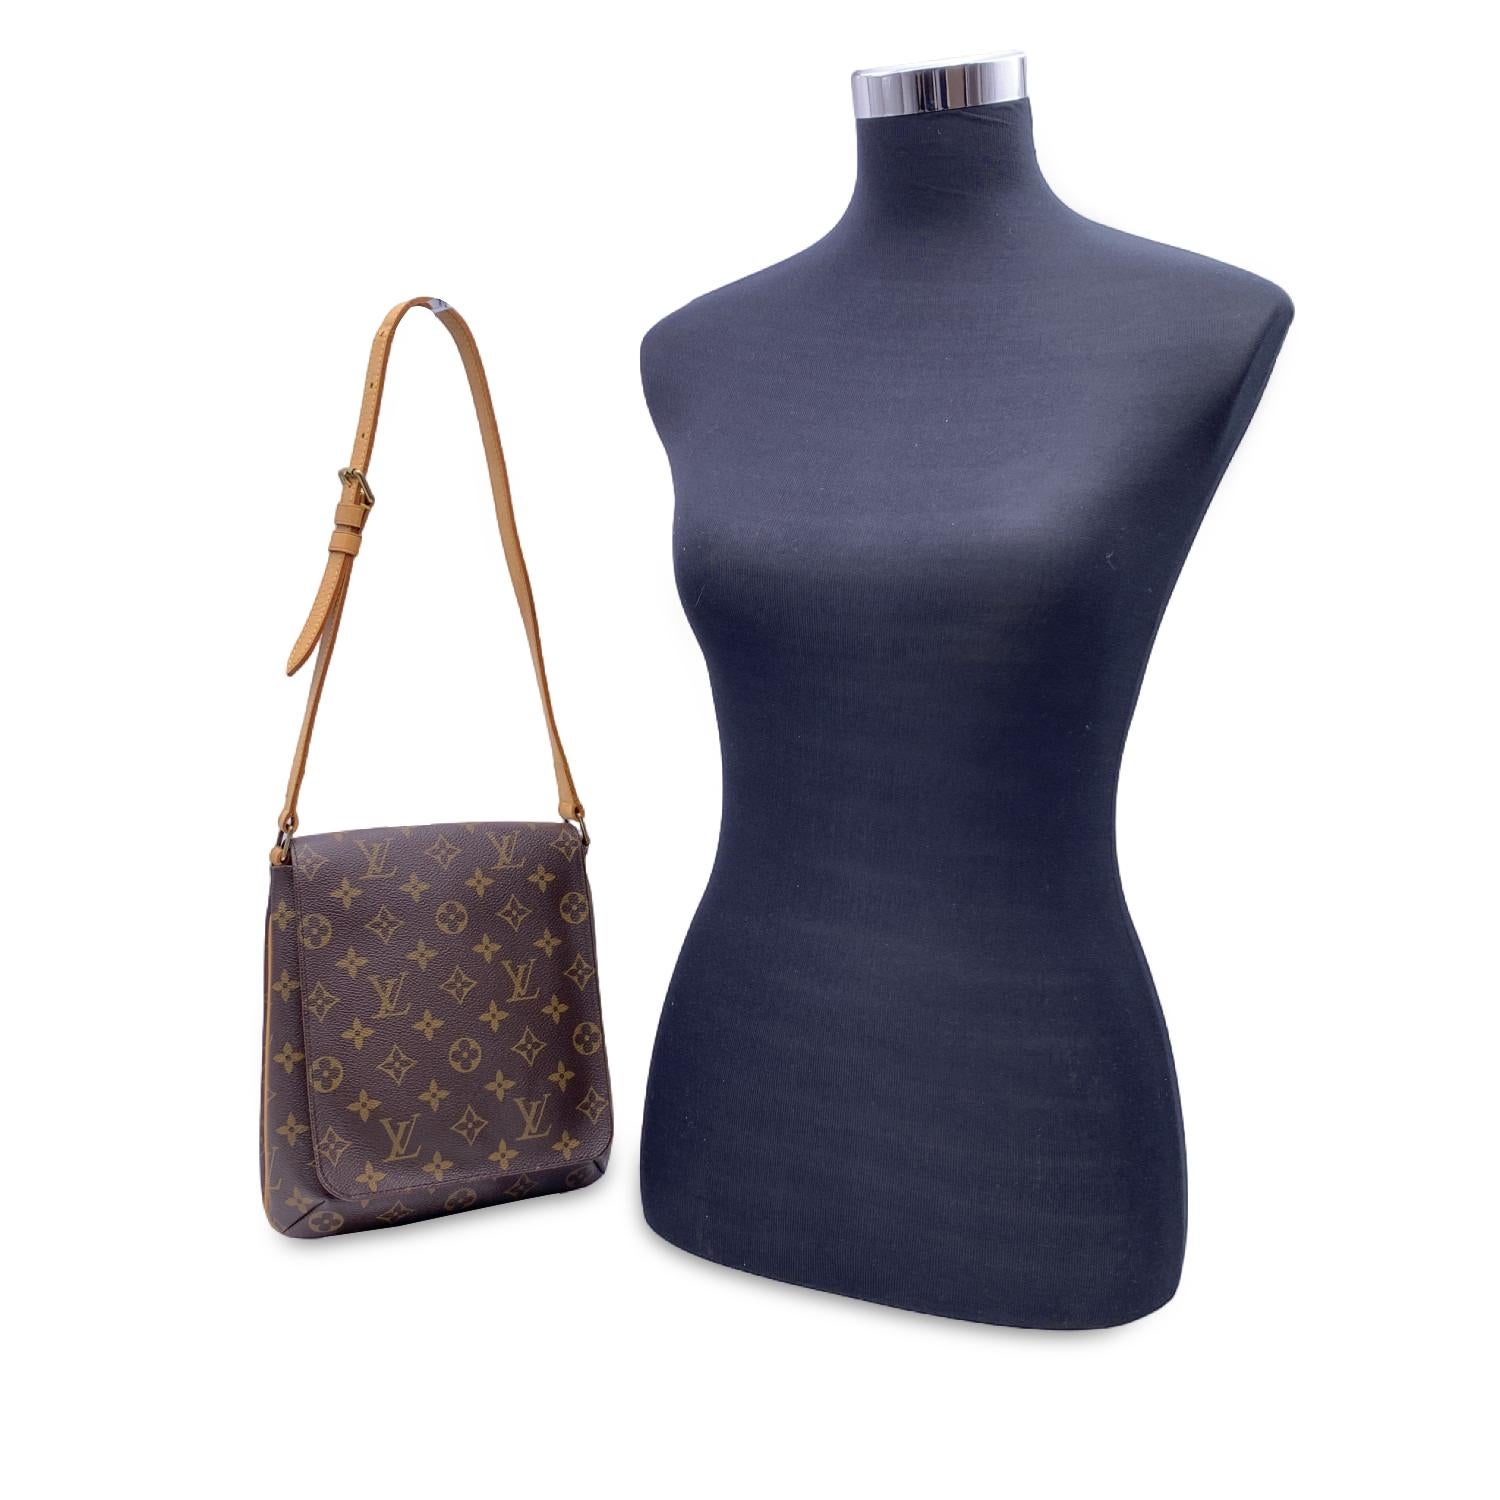 Louis Vuitton 'Musette Salsa'Shoulder Bag, crafted in timeless LV monogram canvas, the bag has golden brass hardware. The exterior features a flap with magnetic button closure, Its interior is lined with soft lining and features 1 open pocket